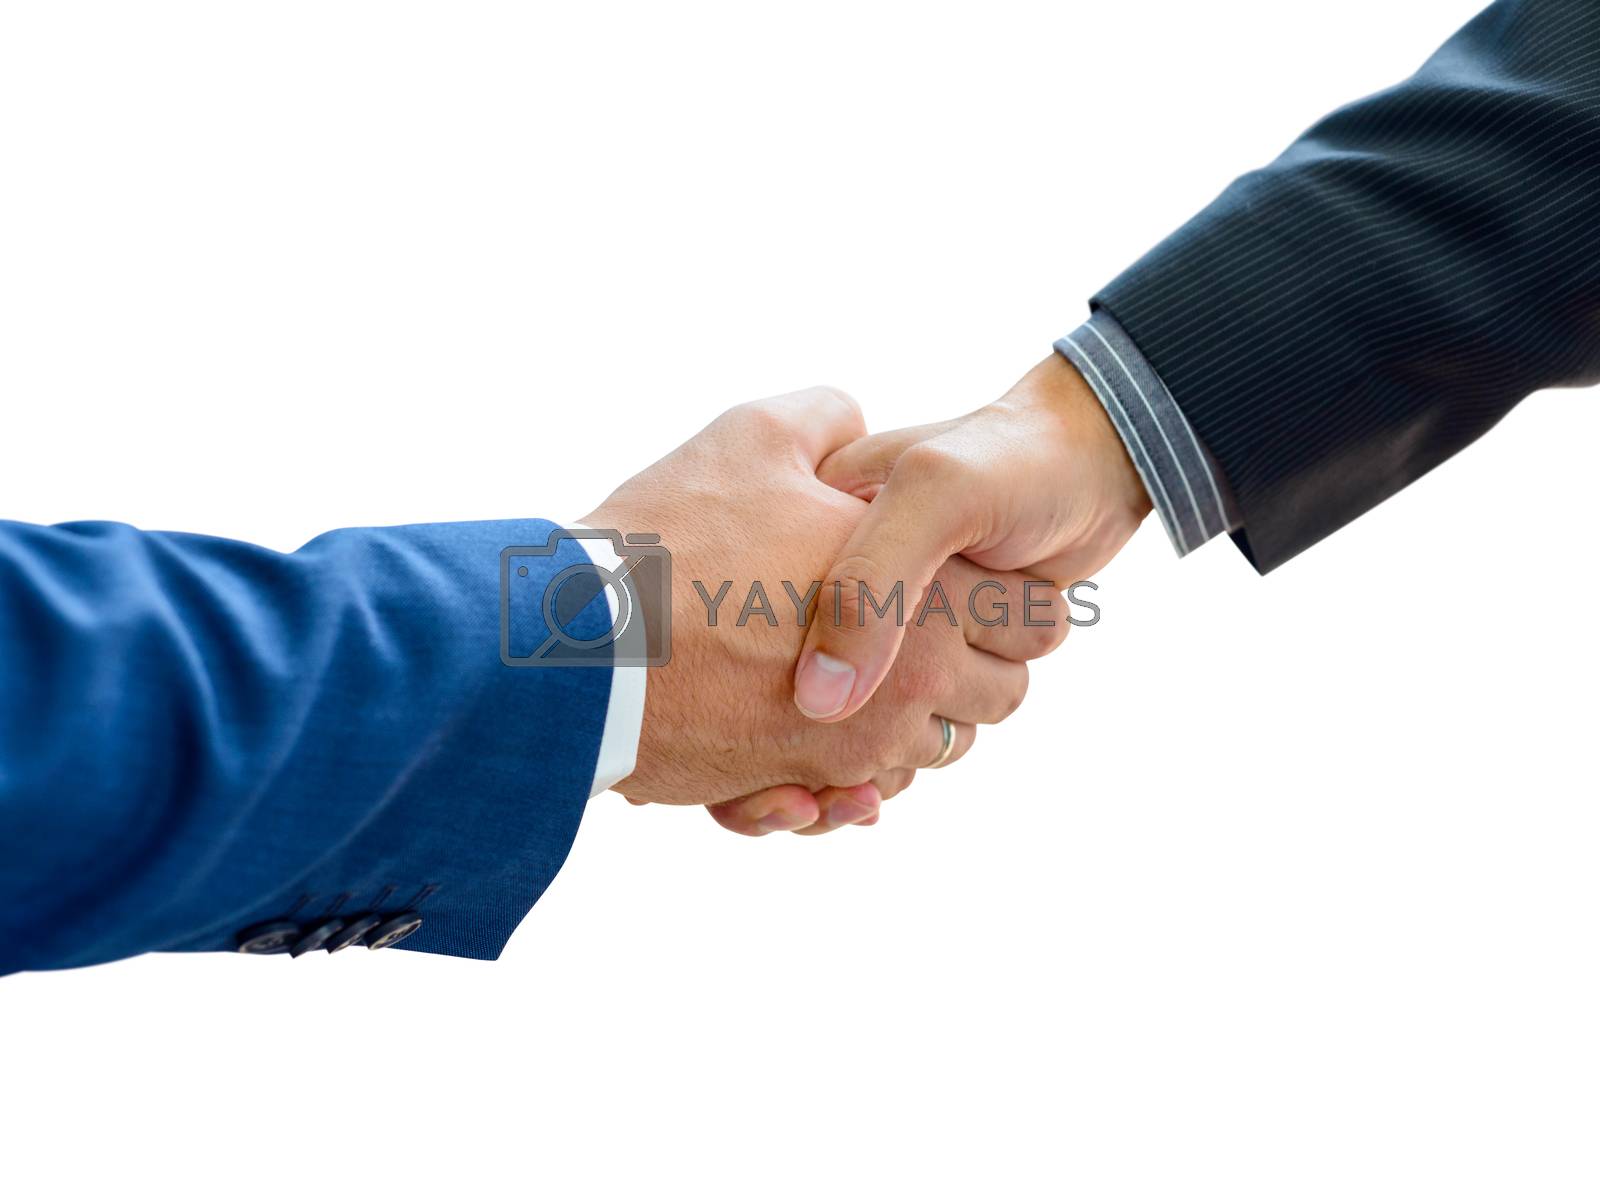 Royalty free image of Business People Shaking Hands on the White Background Close-up by maxpro